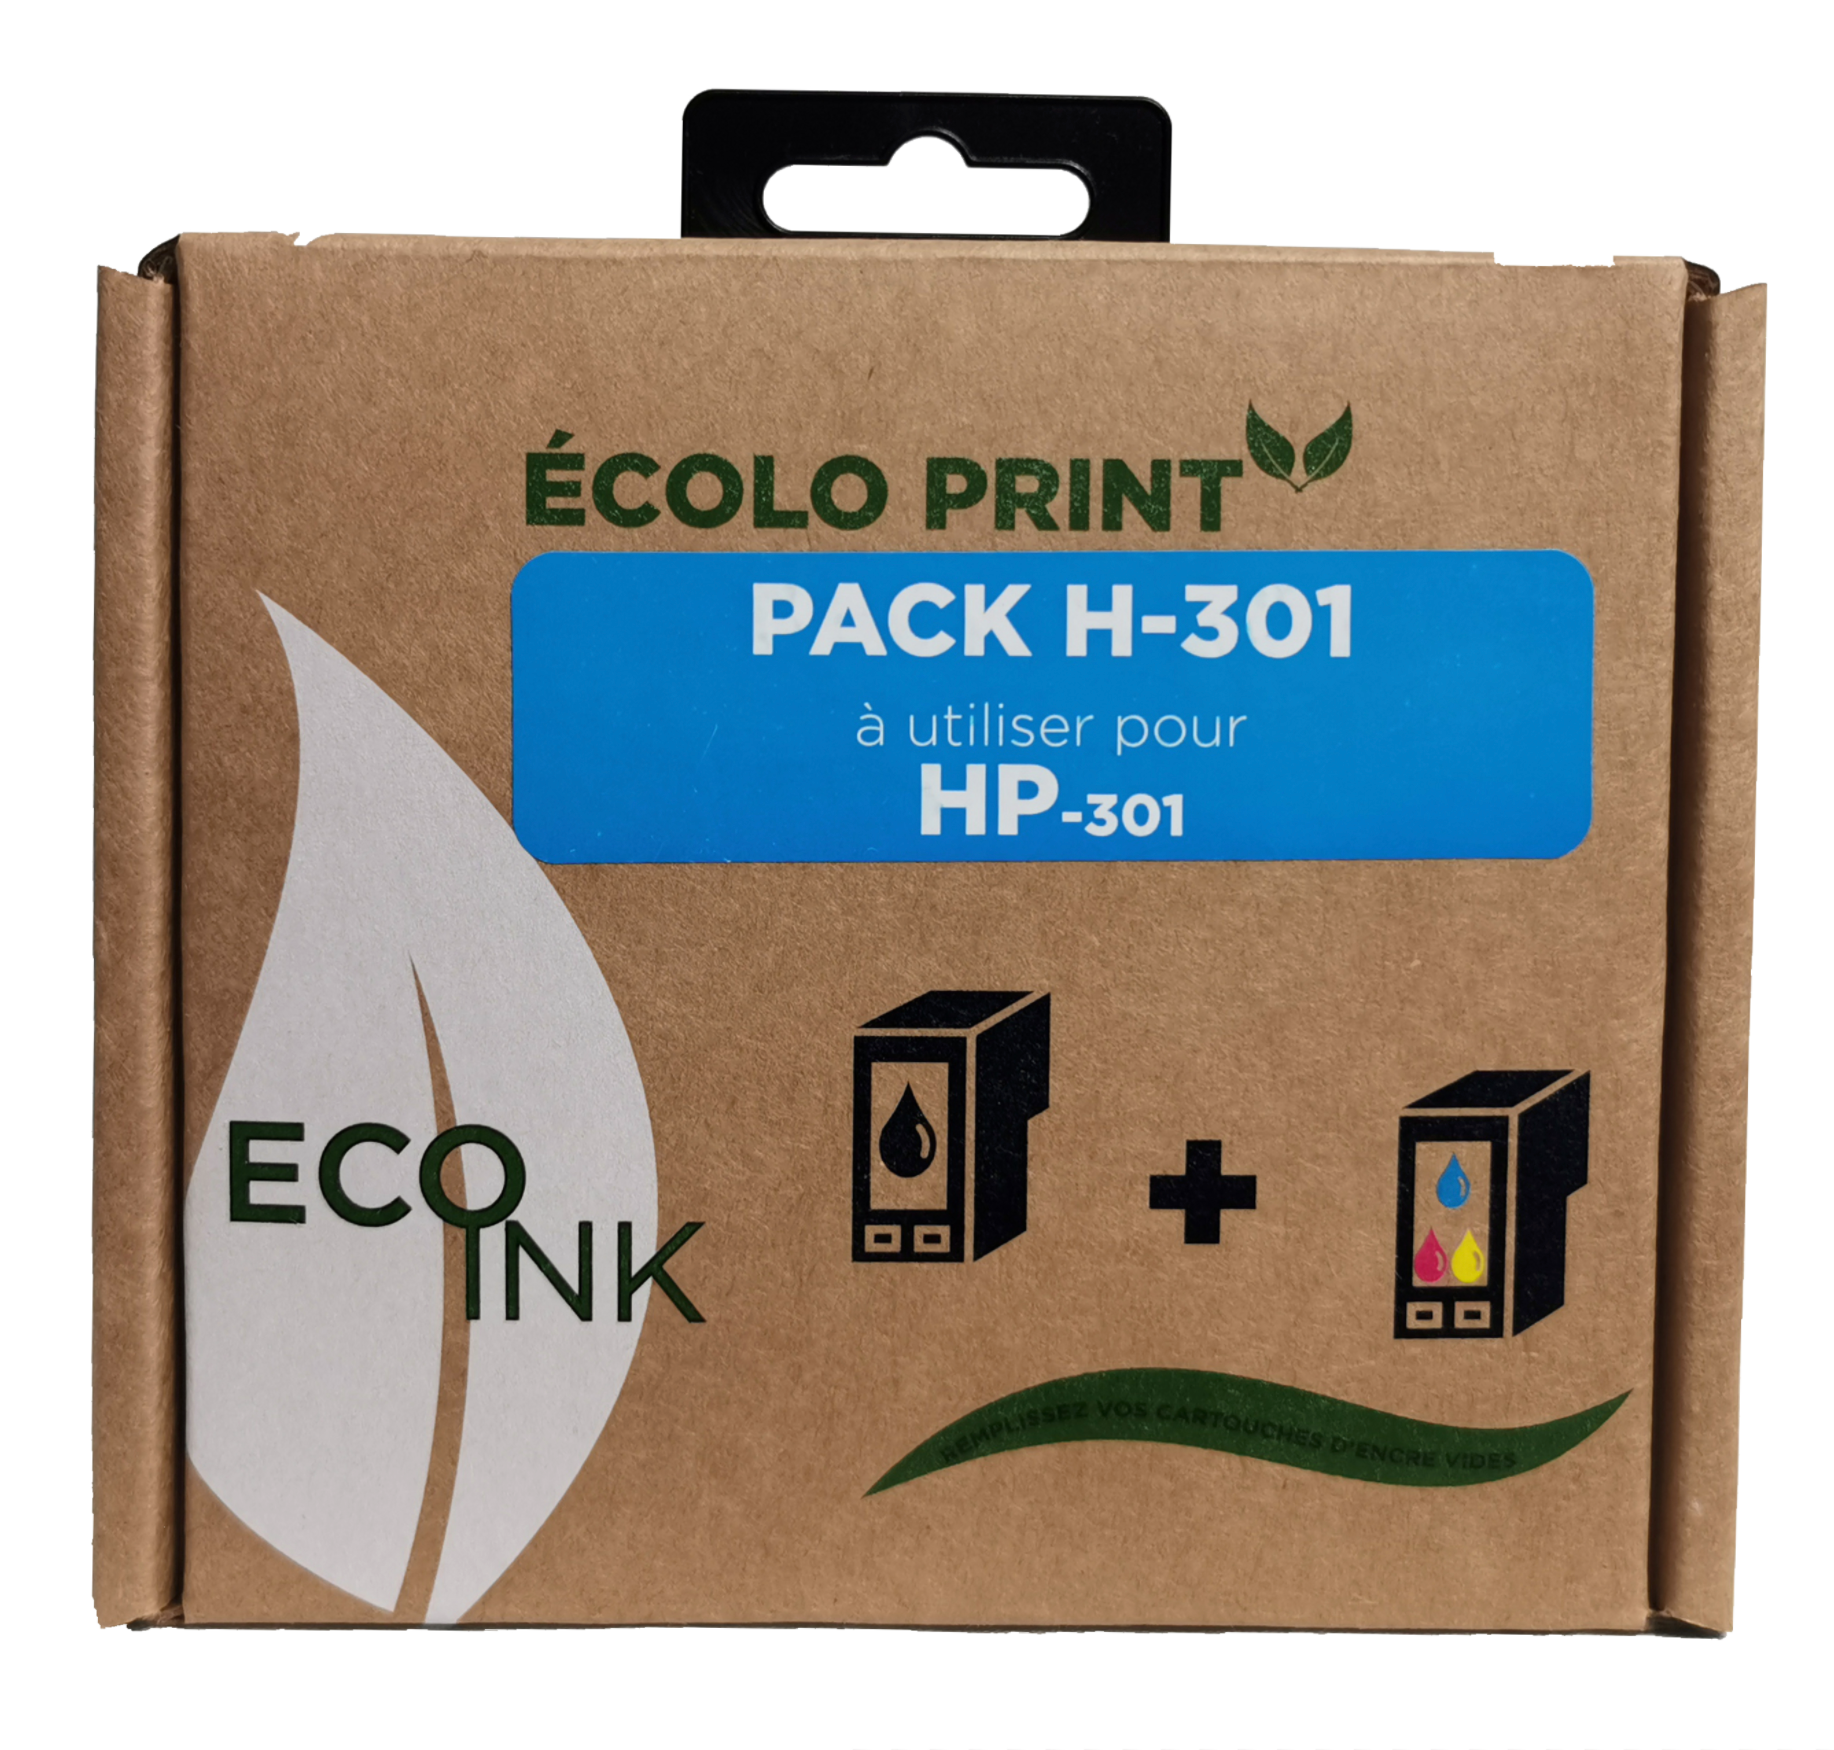 ECO-Ink Kit Recharge HP 301 (4 recharges)